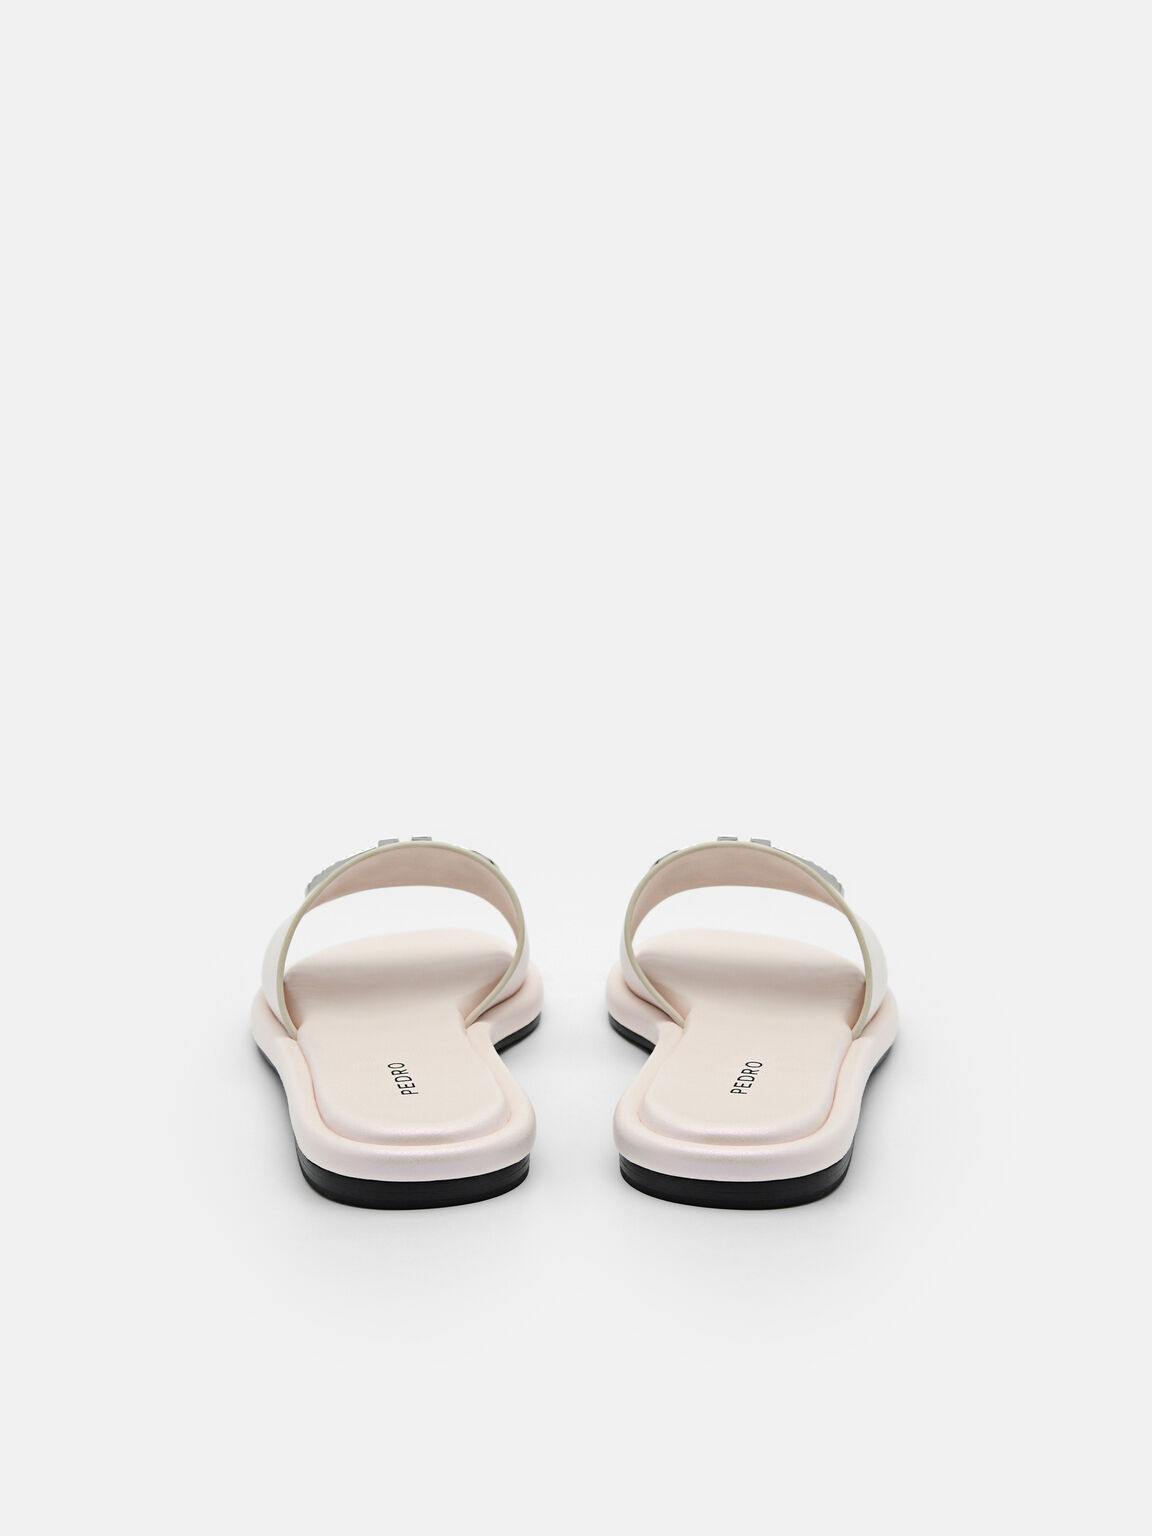 PEDRO Icon Pearlized Leather Sandals, White, hi-res